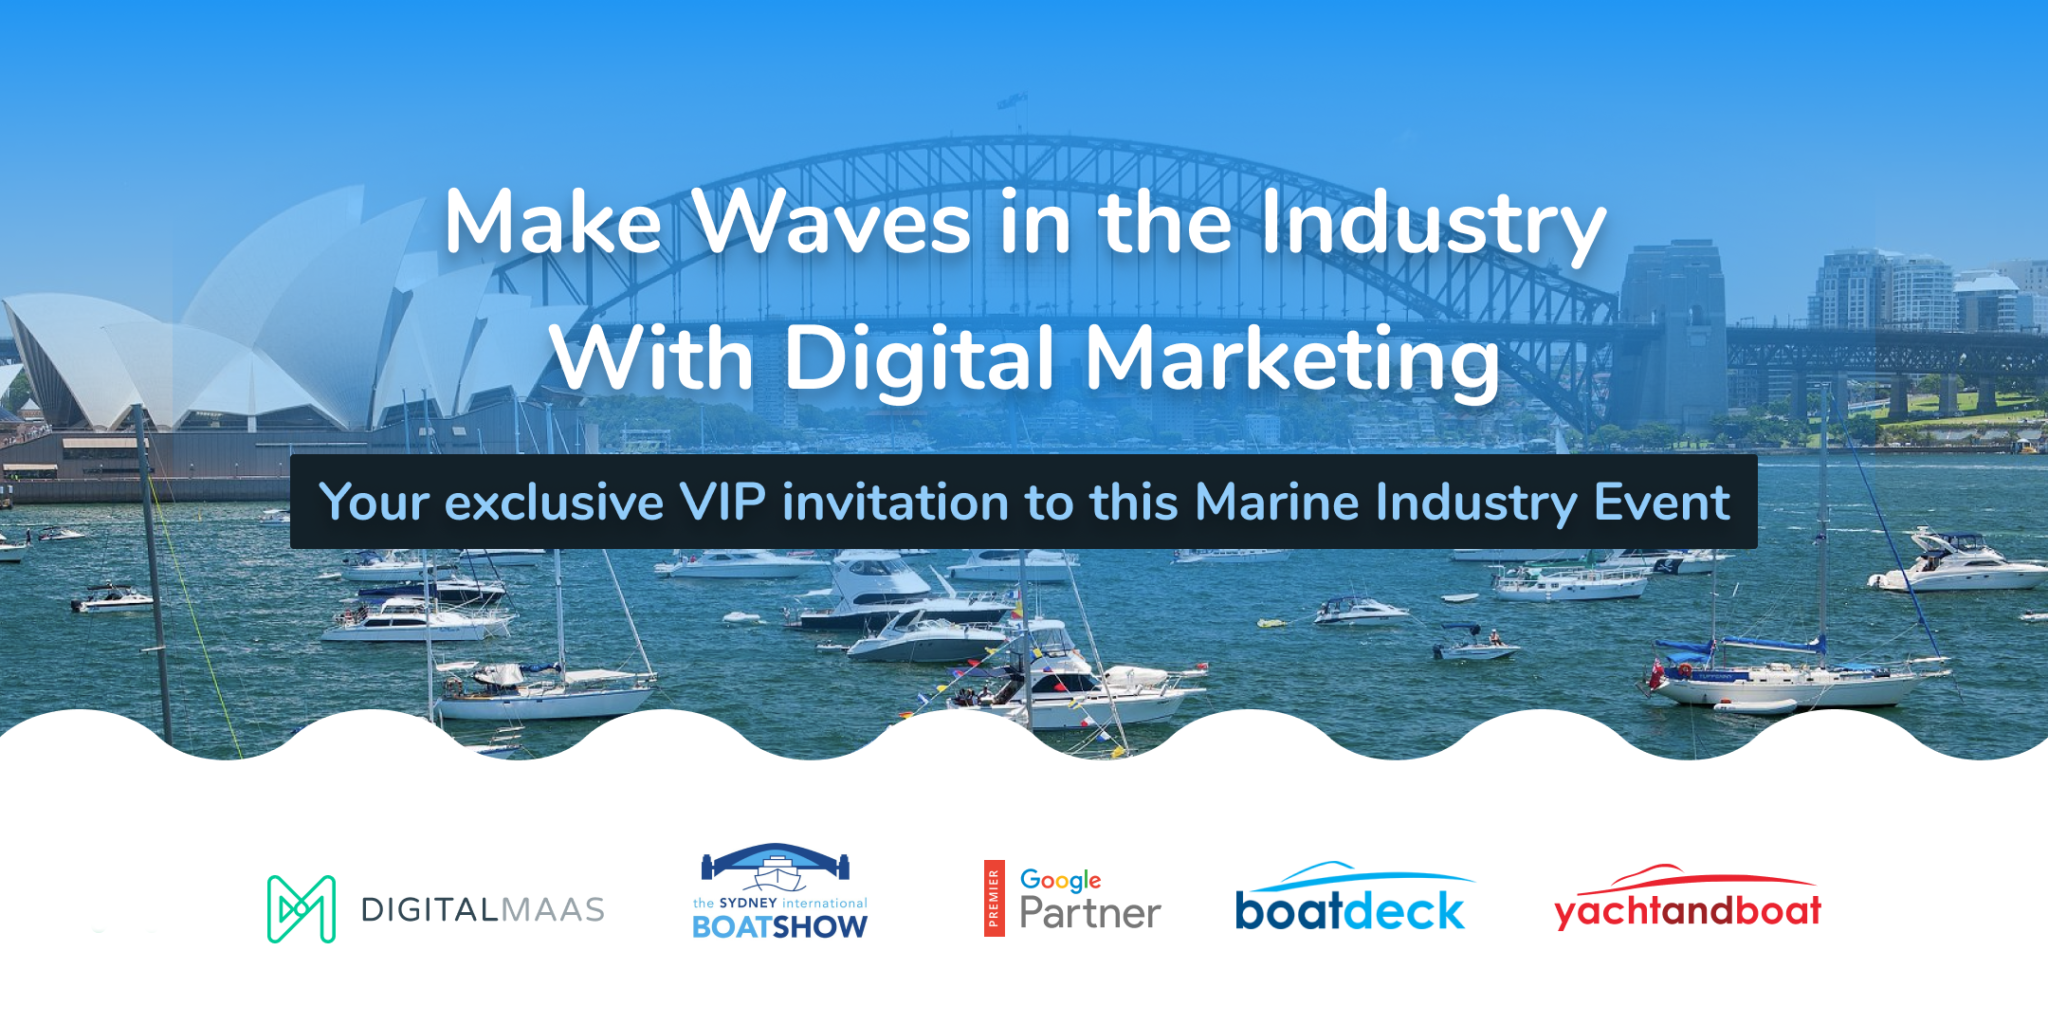 Make Waves in the Industry With Digital Marketing